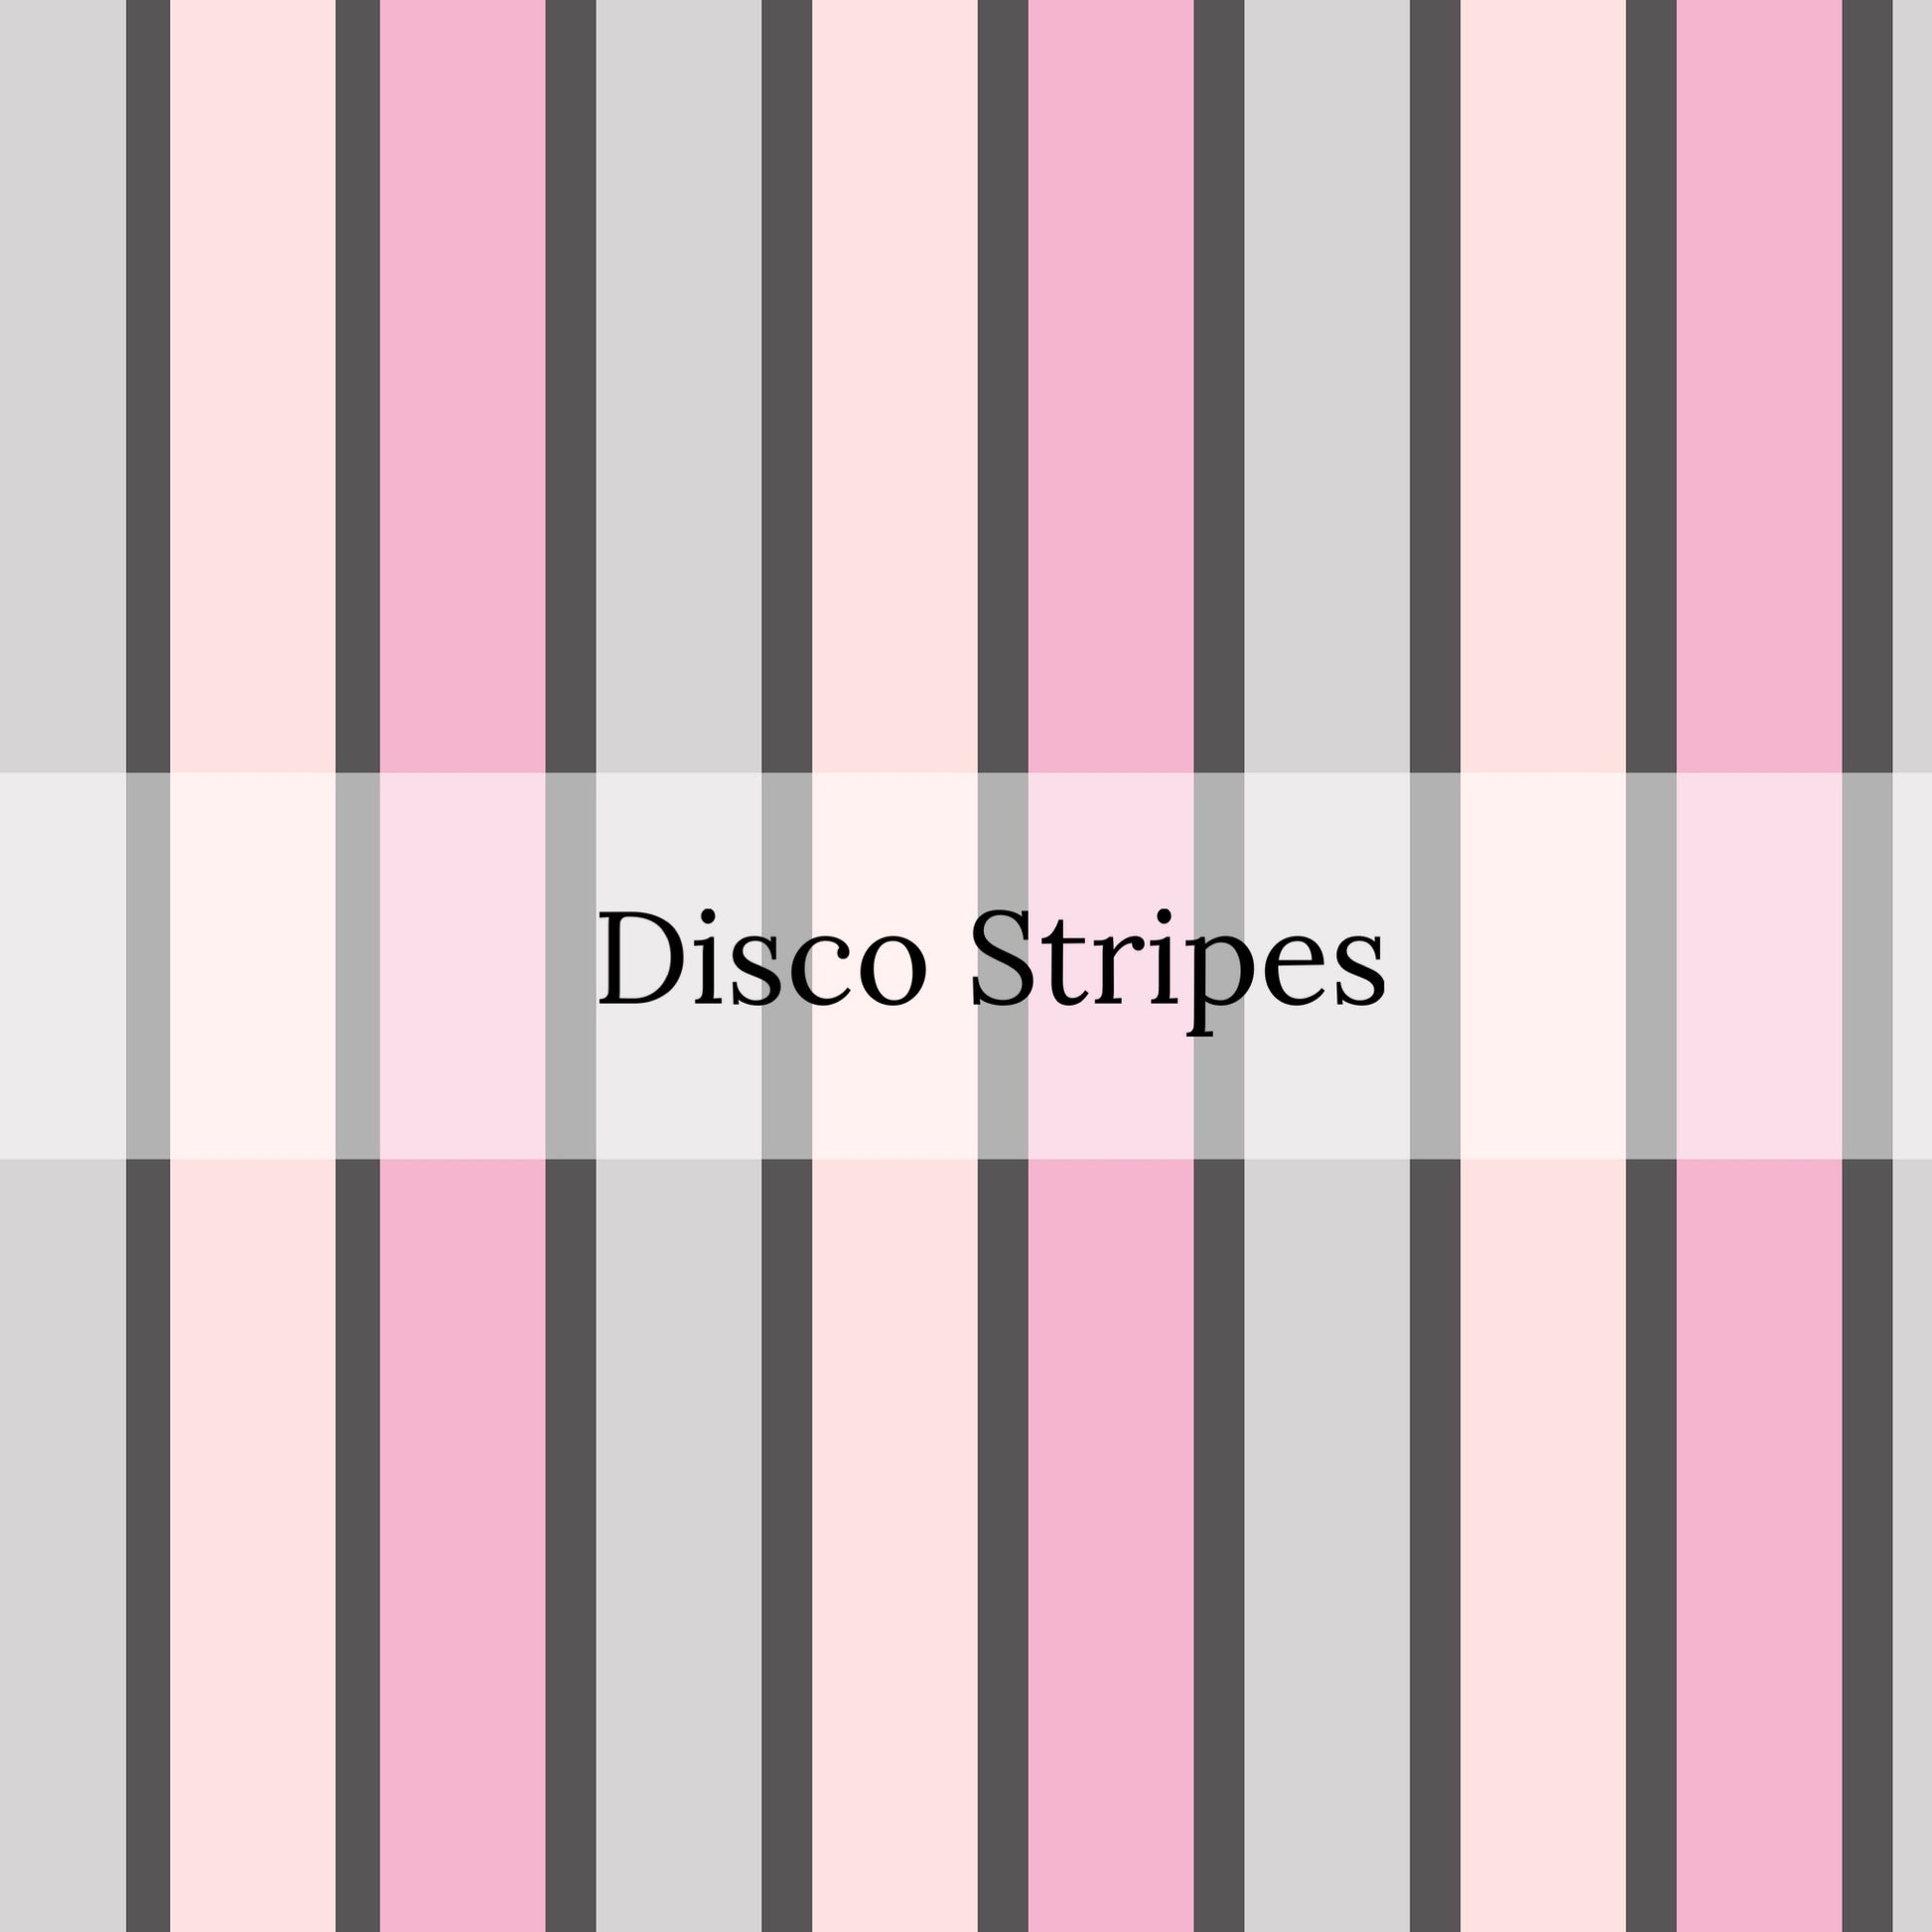 Pink and blue striped pattern illustration